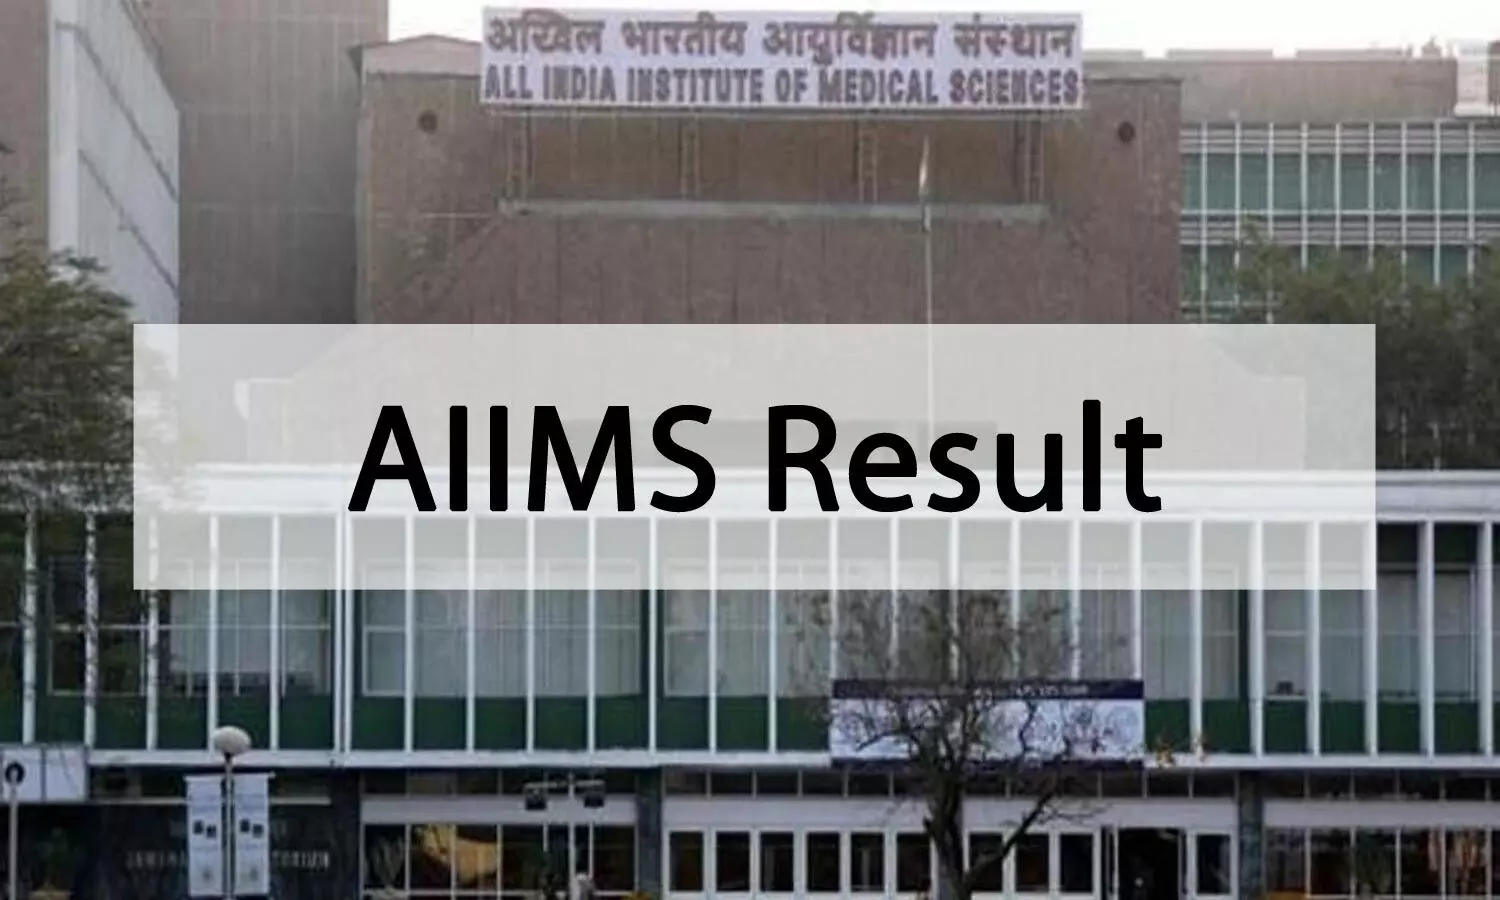 AIIMS publishes Part I Final Result of MD, MS, MDS Professional Exams June 2020